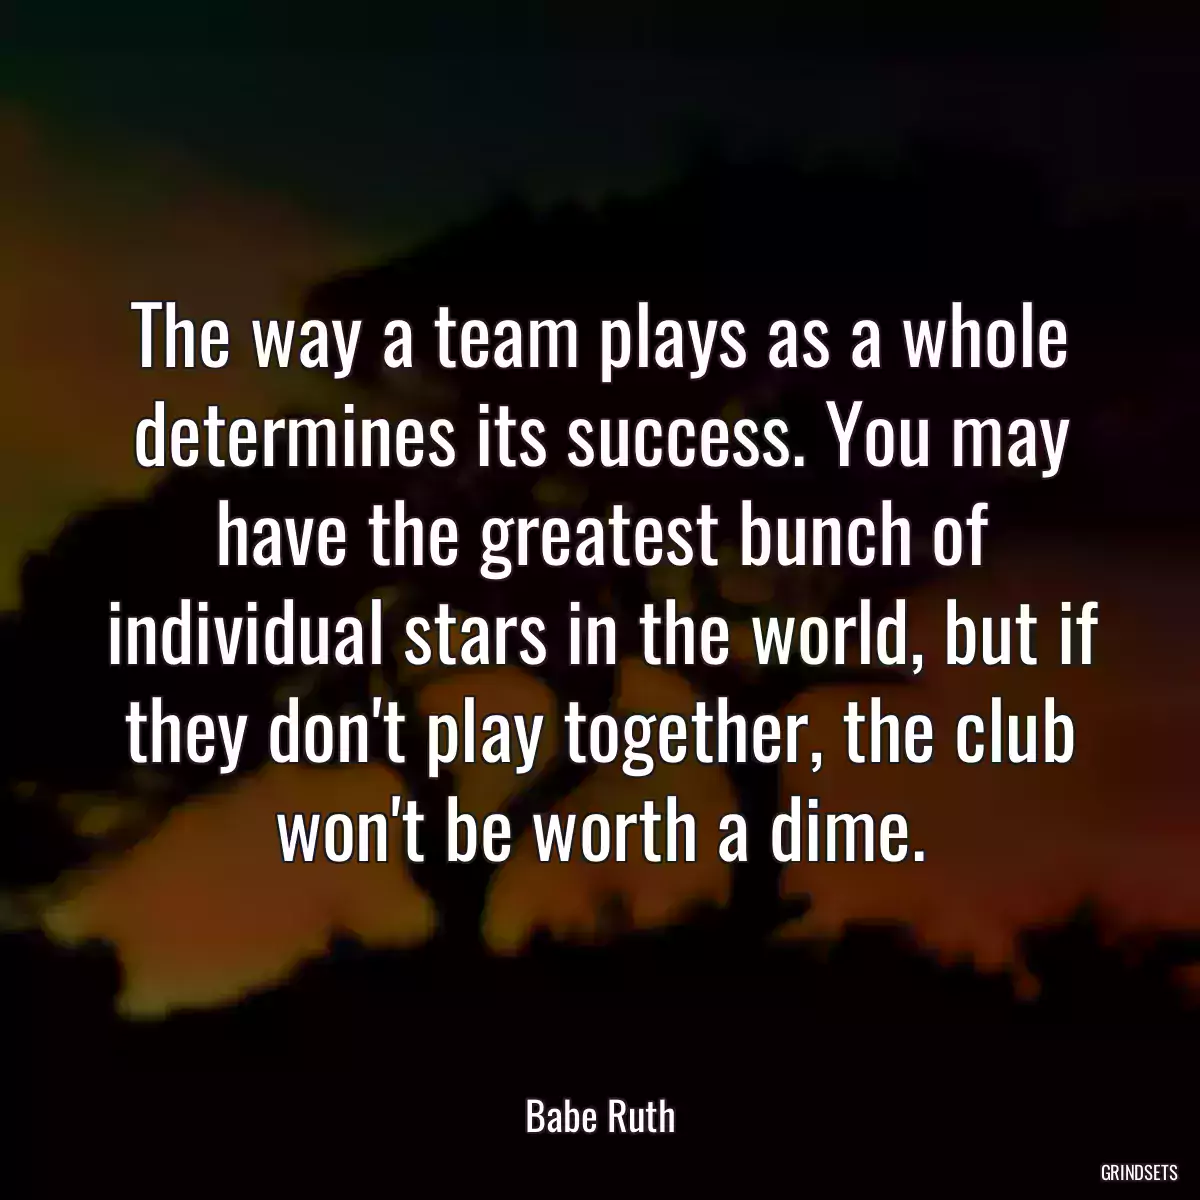 The way a team plays as a whole determines its success. You may have the greatest bunch of individual stars in the world, but if they don\'t play together, the club won\'t be worth a dime.